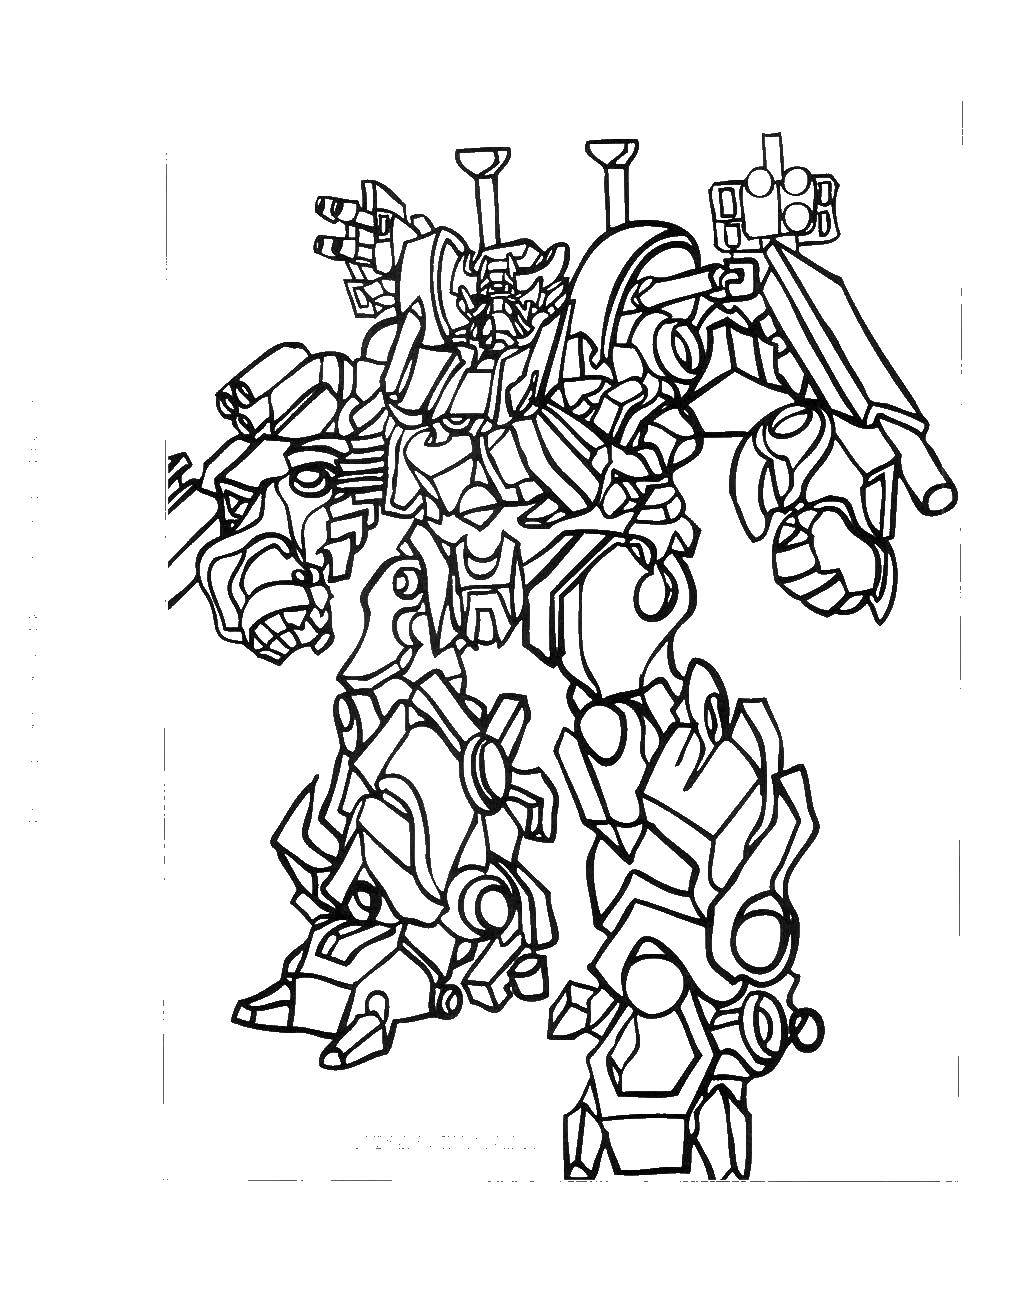 Coloring Armed transformer. Category robots. Tags:  level, robot.